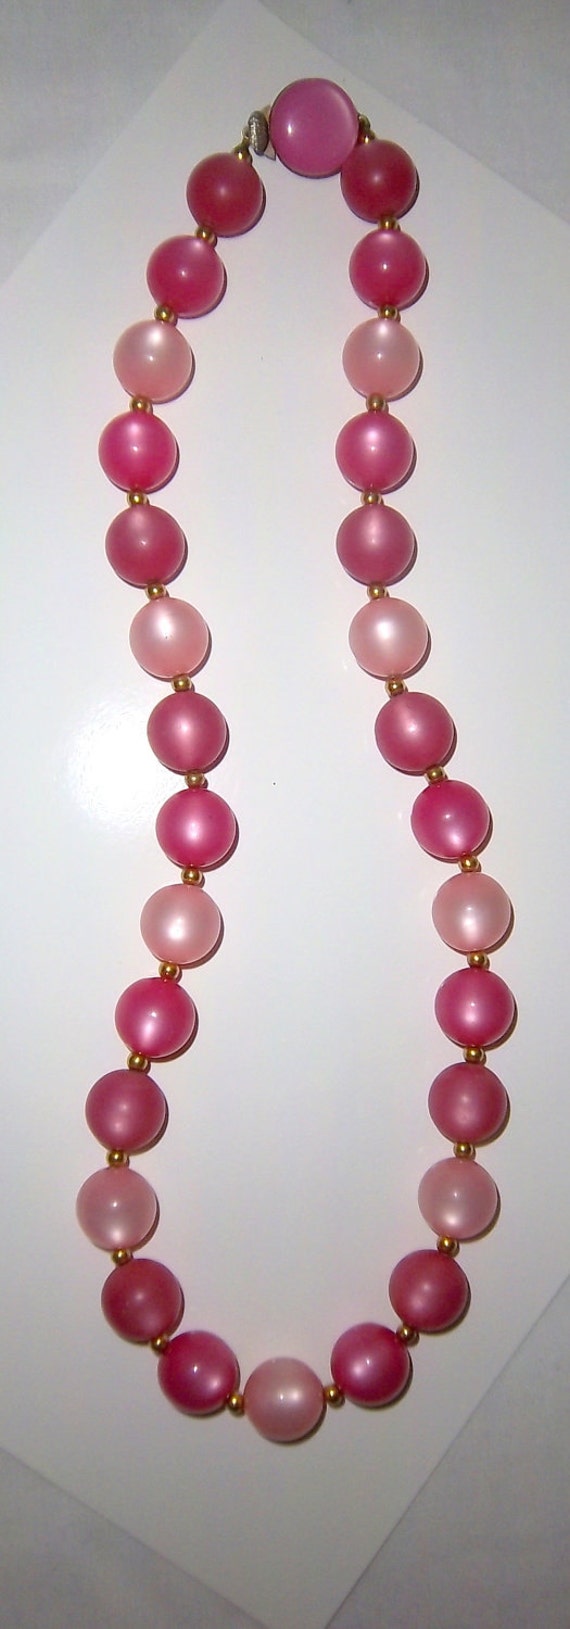 Stunning Vintage Shades of Pink Beaded Necklace